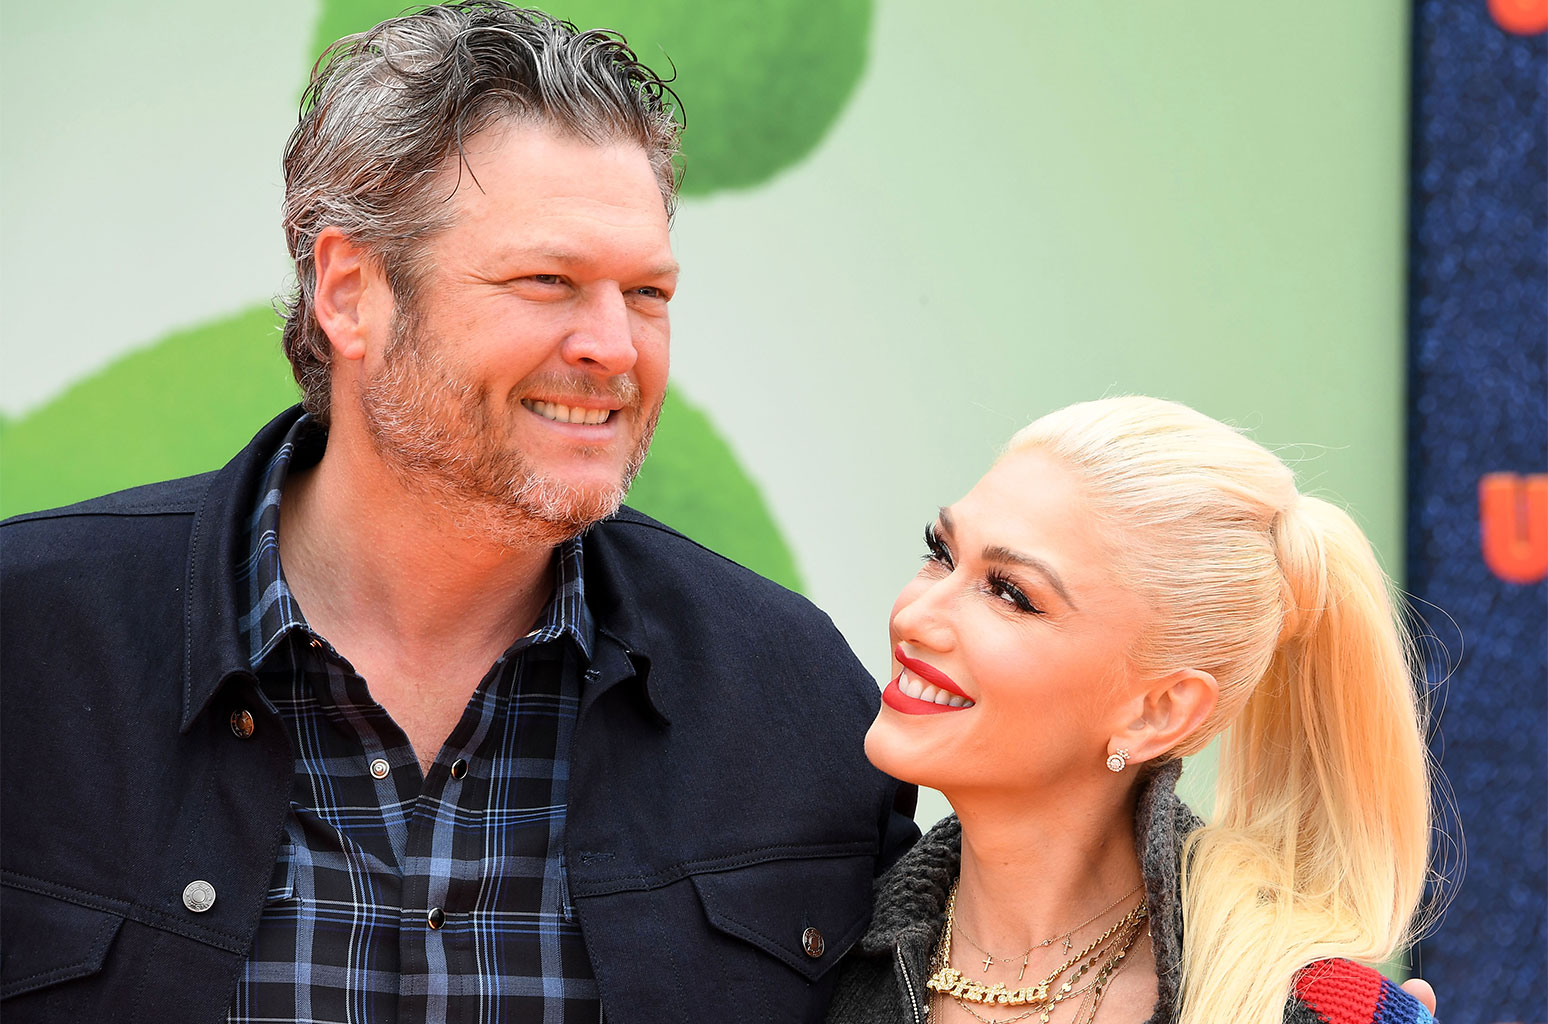 Blake Shelton Debuts at No. 1 on Top Country Albums &amp; Hits Hot Country Songs Top 10 With Gwen Stefani Duet - www.billboard.com